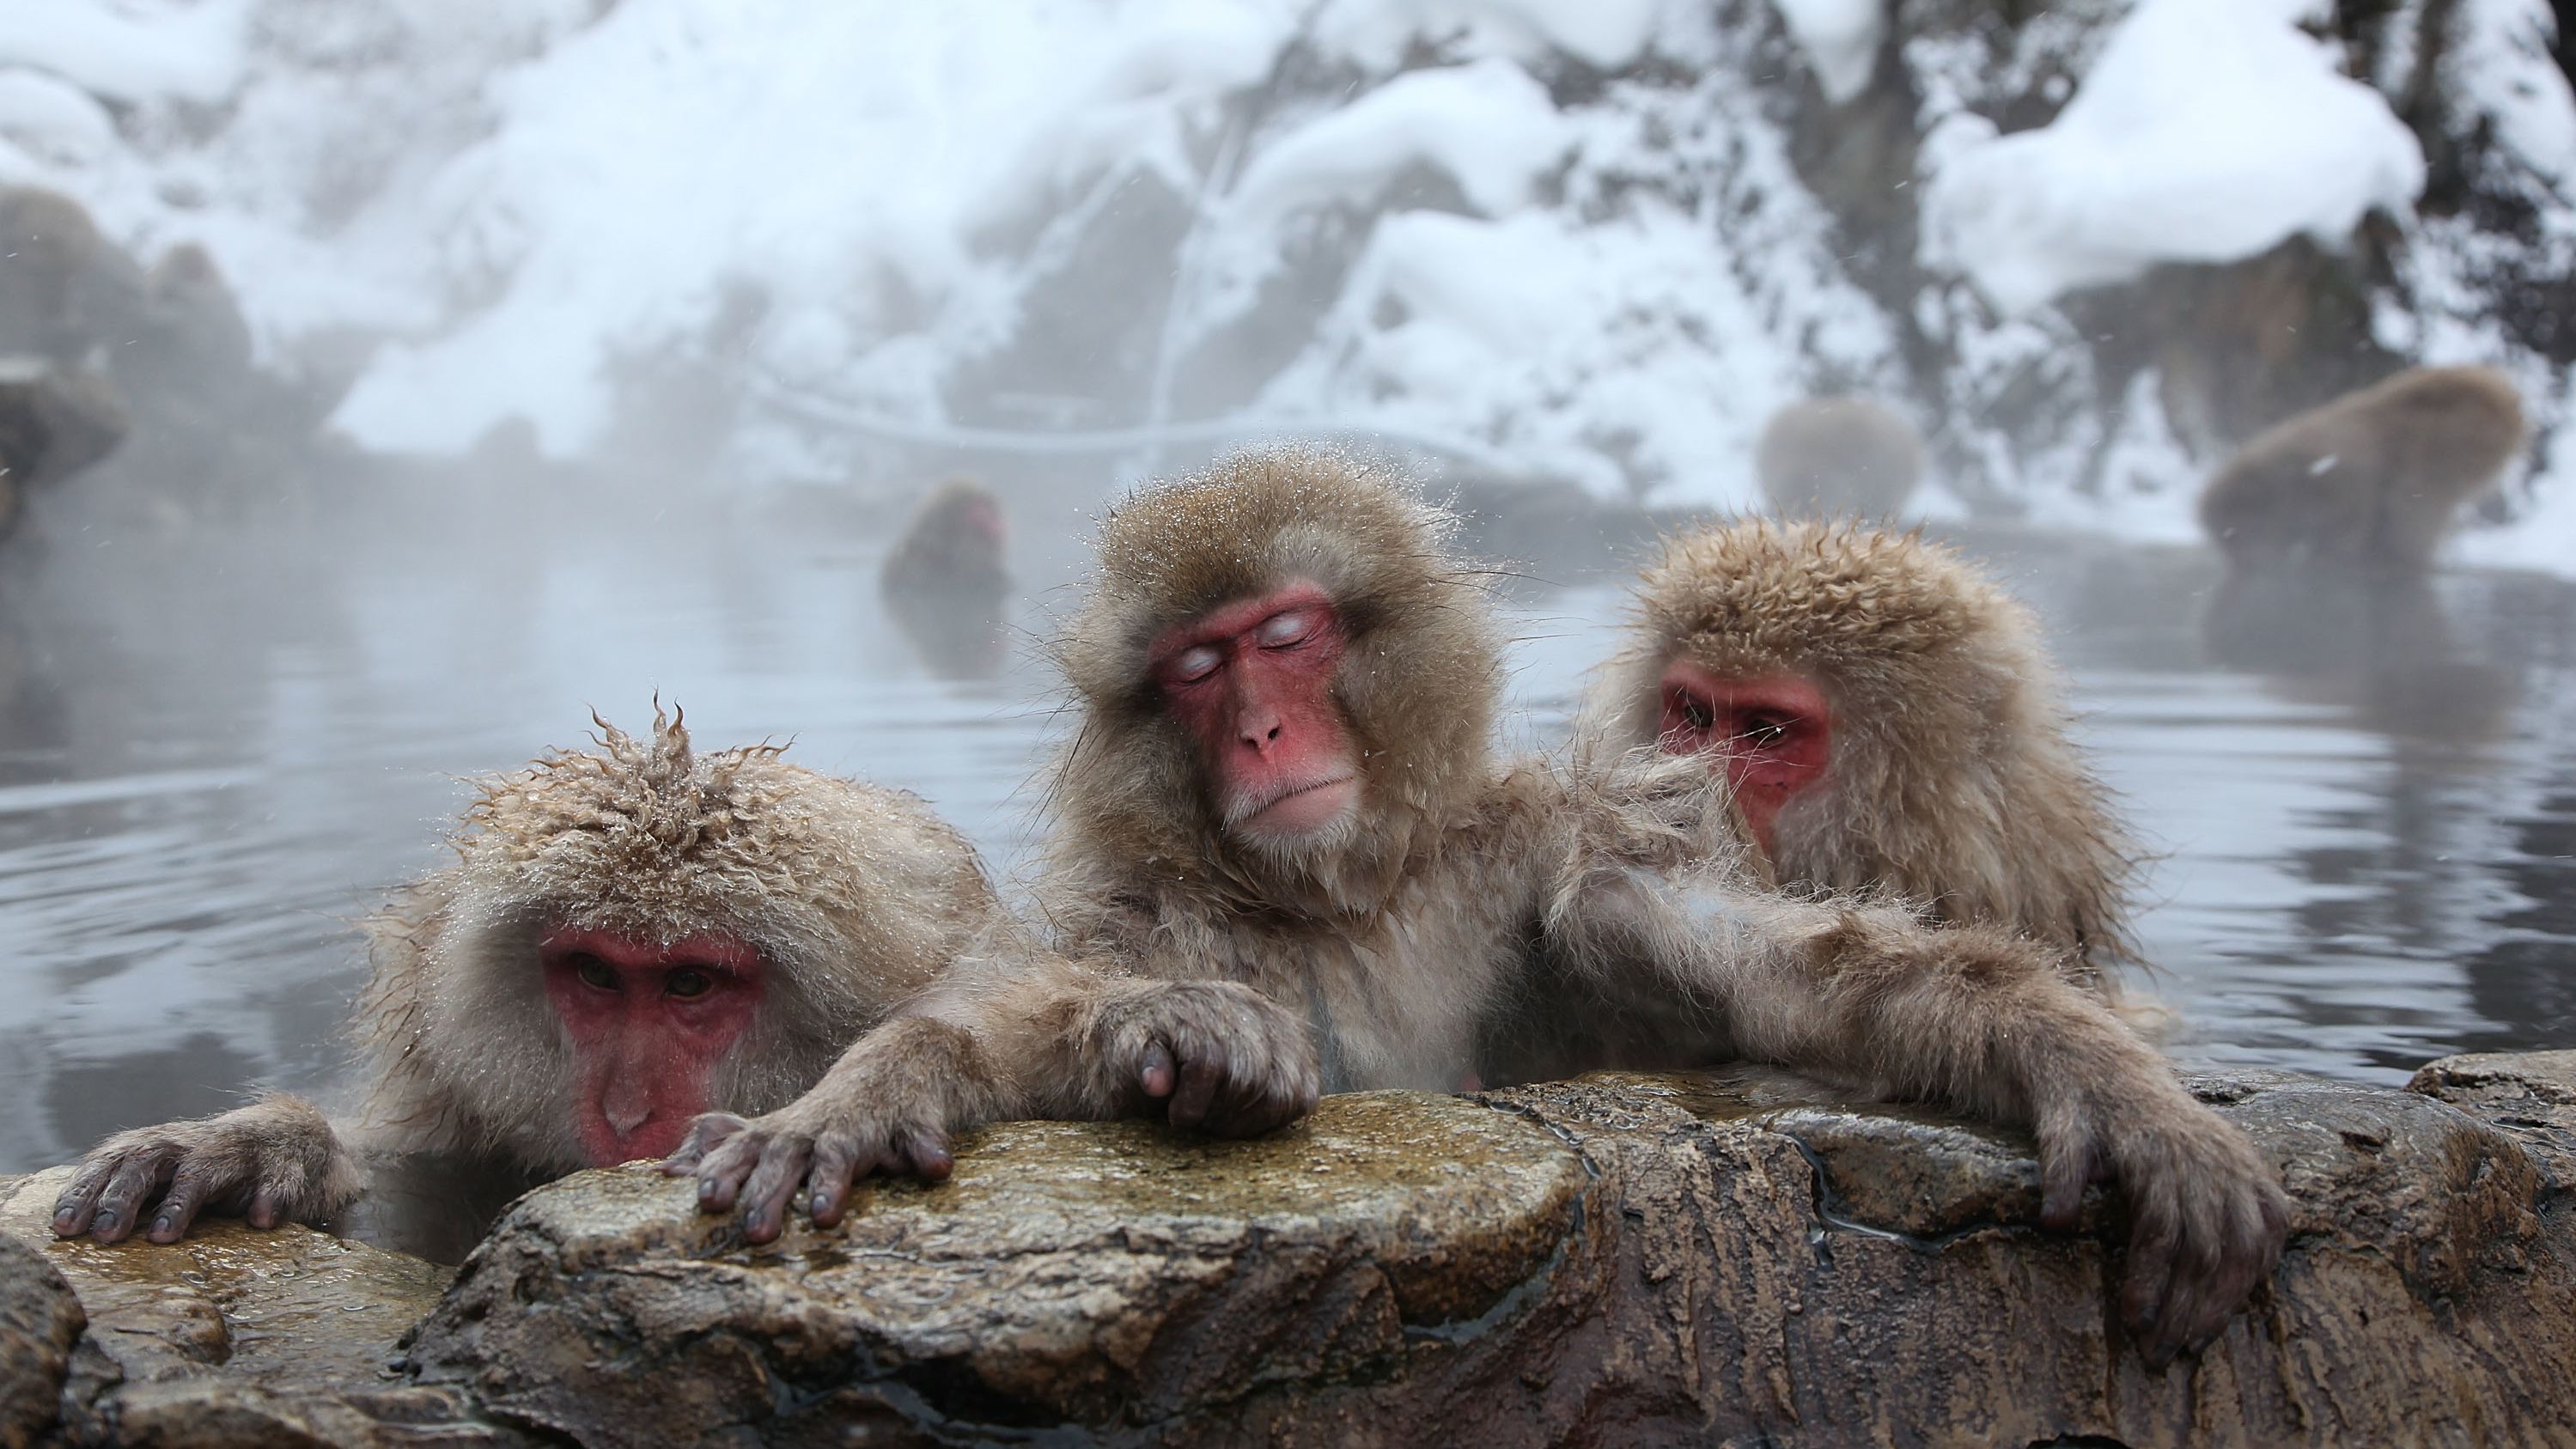 Monkey Porn Videos With Women Full Length - See Japan's snow monkeys relax in their own hot springs | CNN